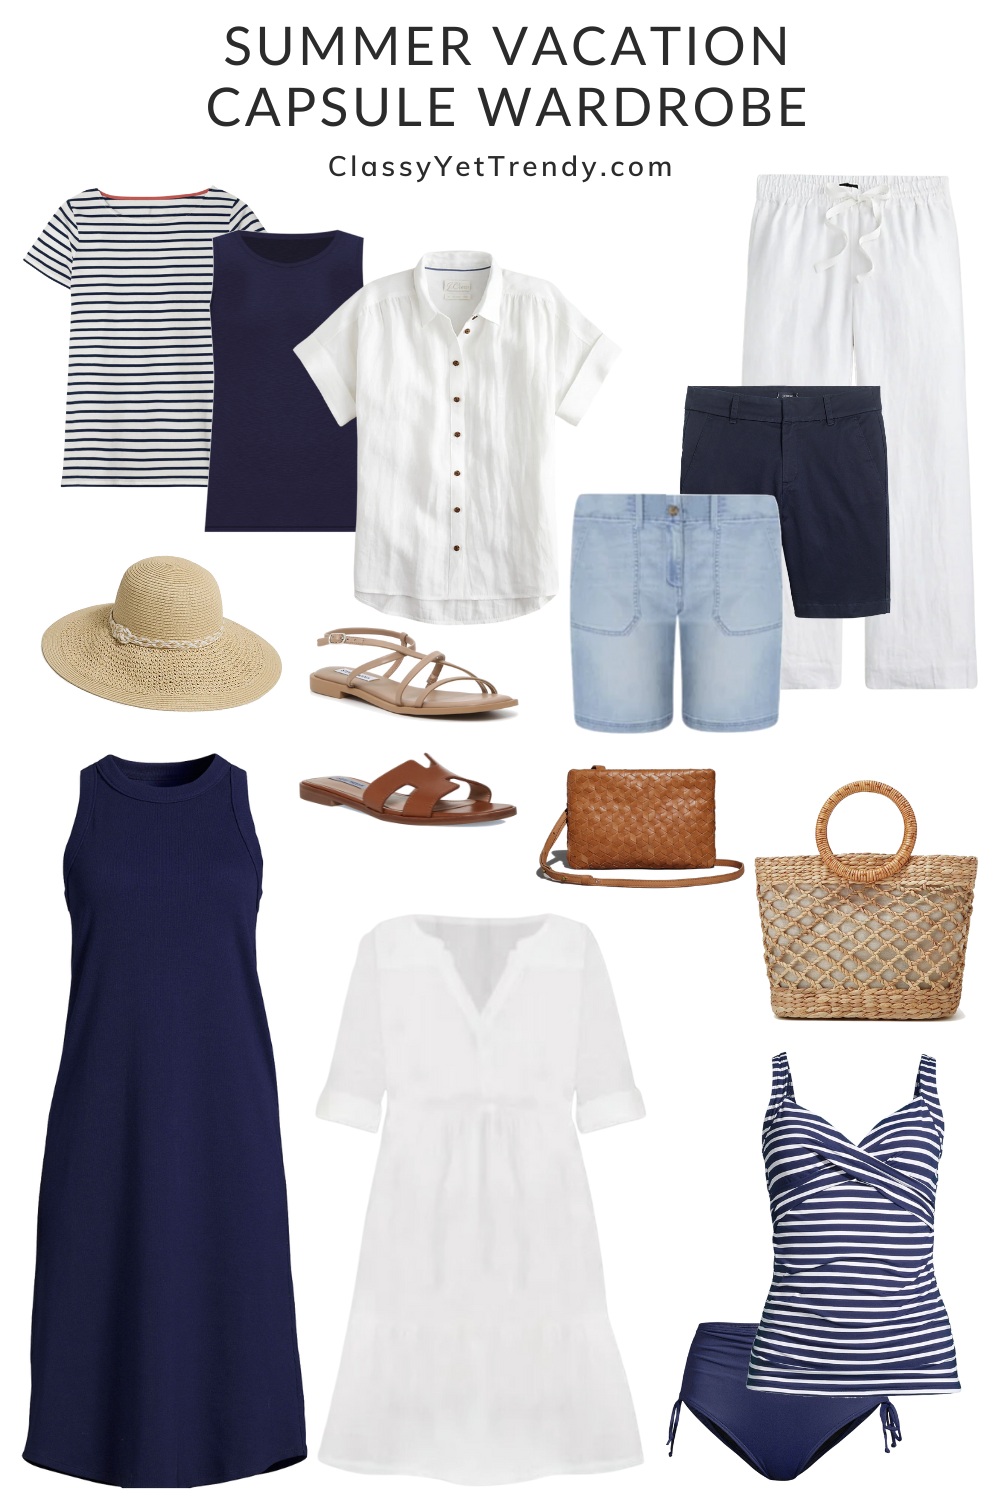 Summer Vacation Capsule Wardrobe  11 Pieces, 10 Outfits - Classy Yet Trendy